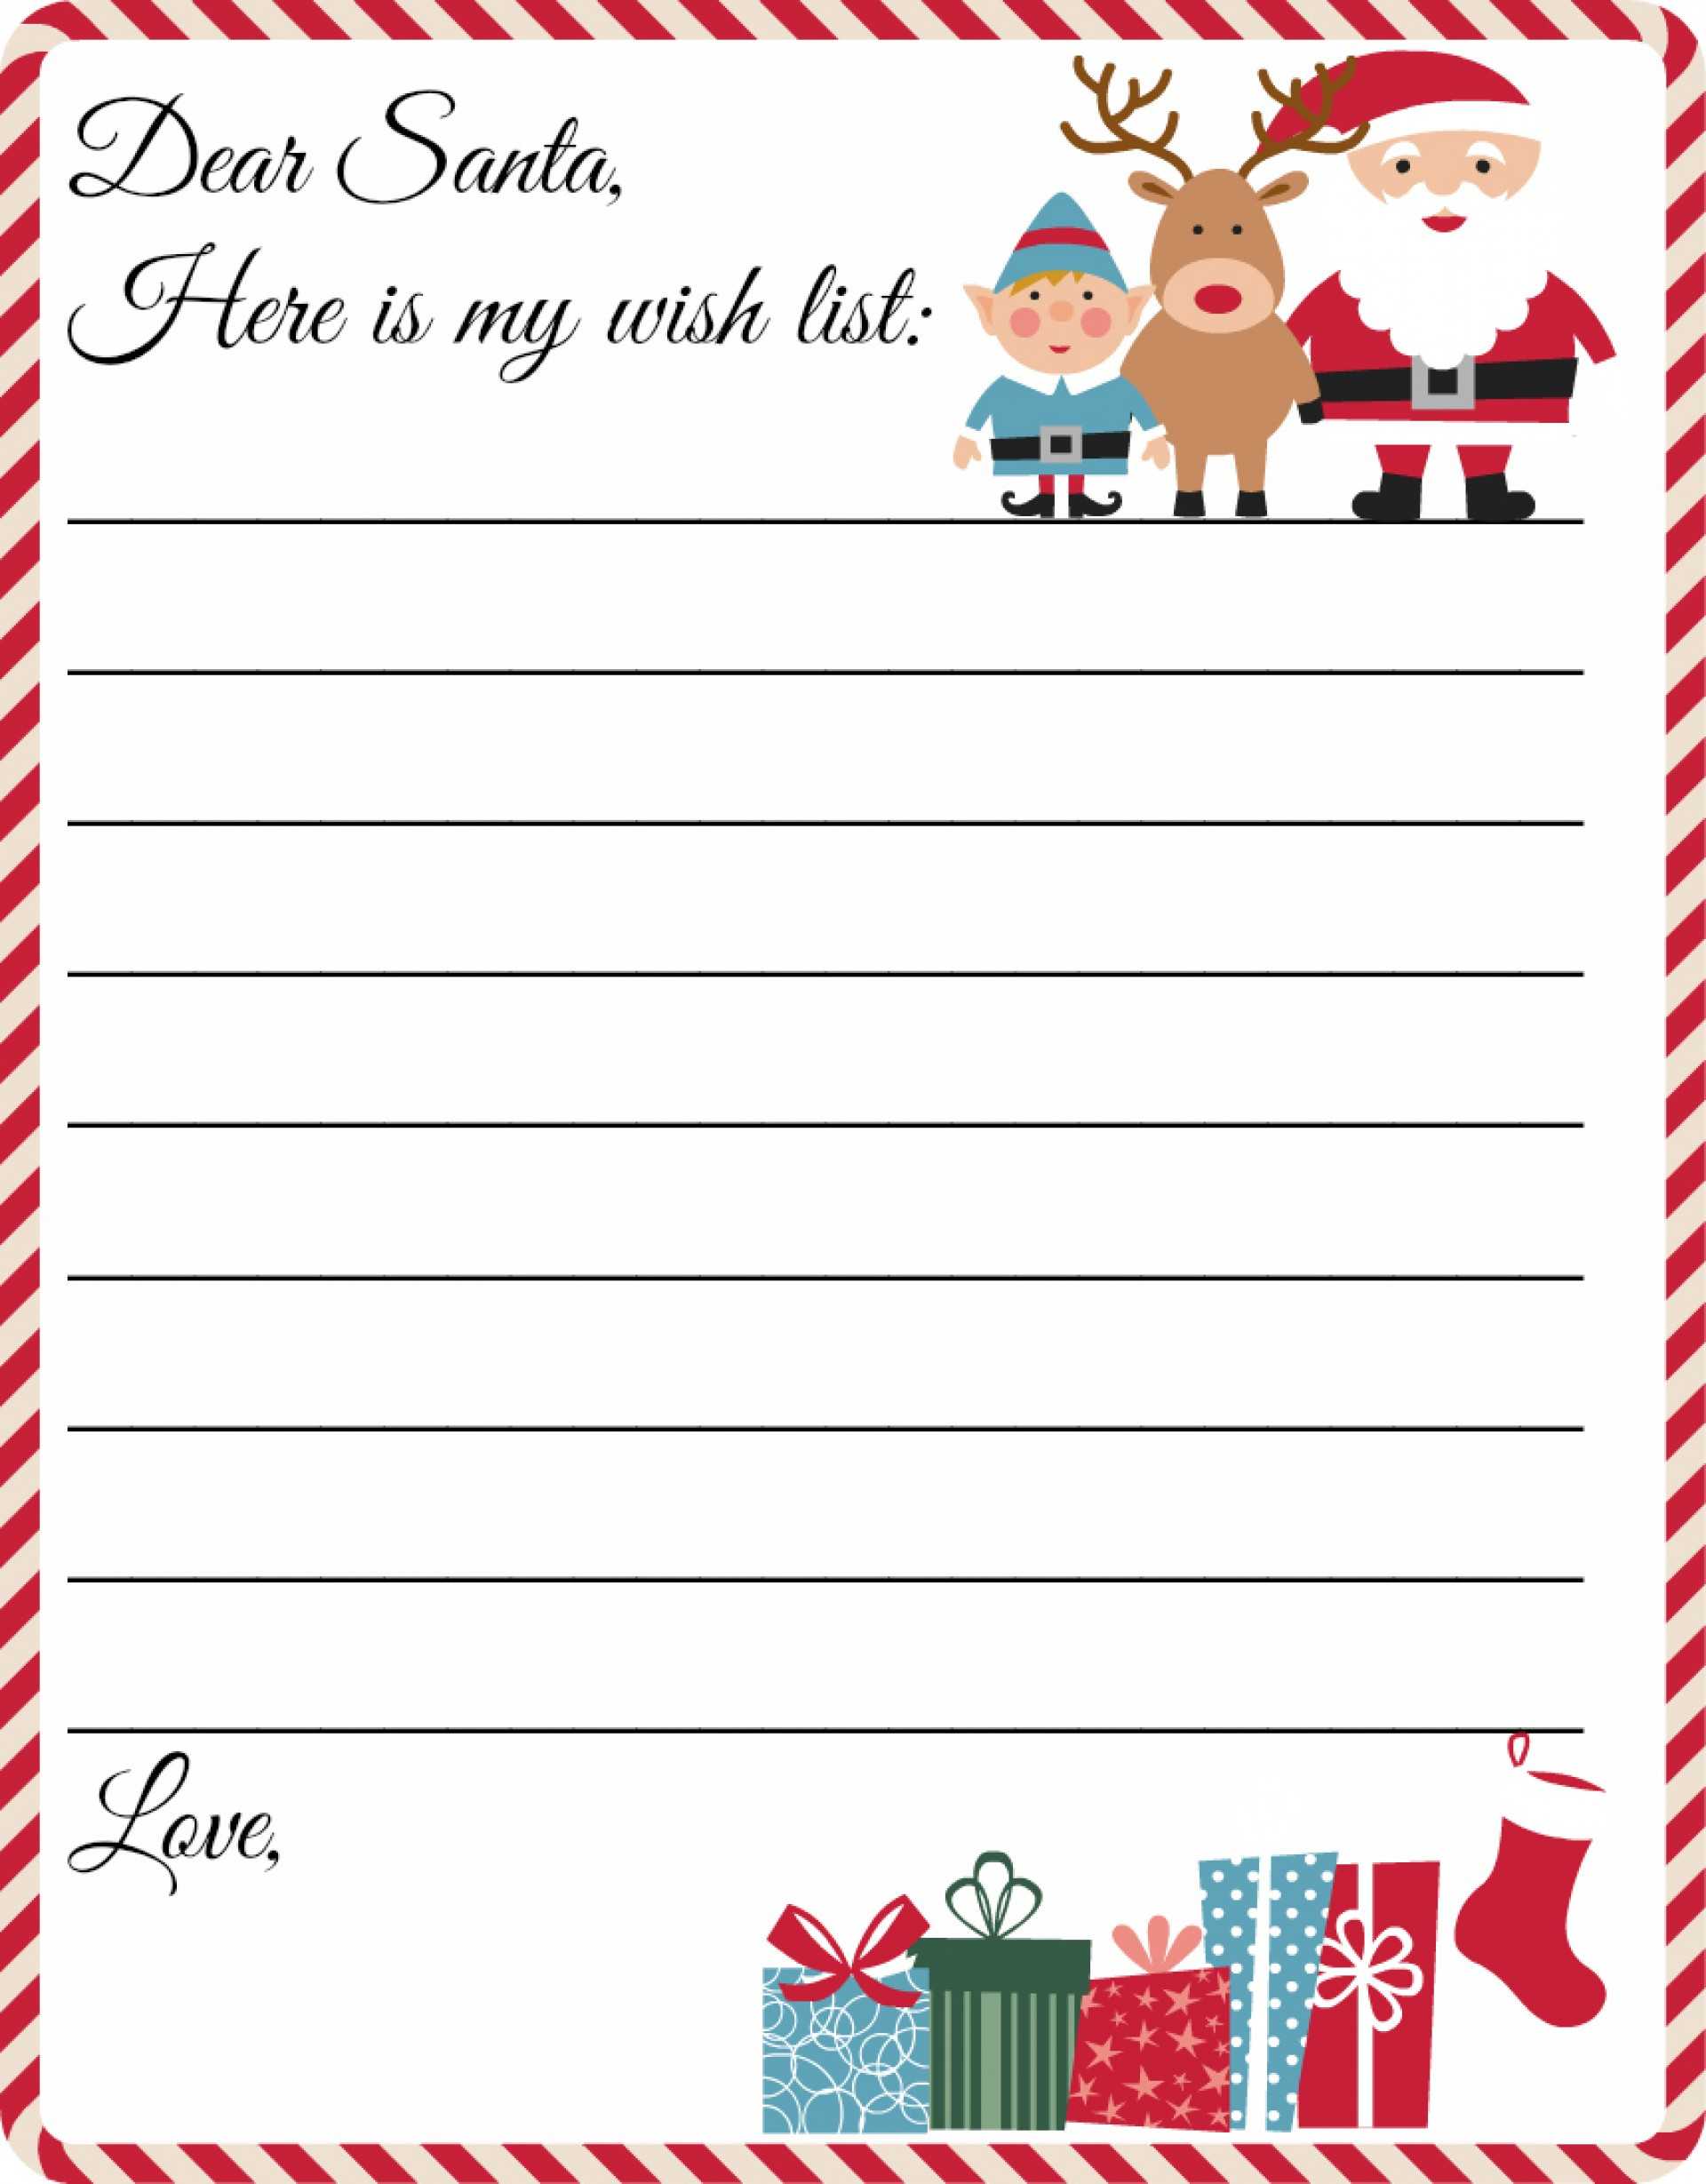 016 Send Free Letters From Santa Claus To Your Child Final Inside Free Letters From Santa Template